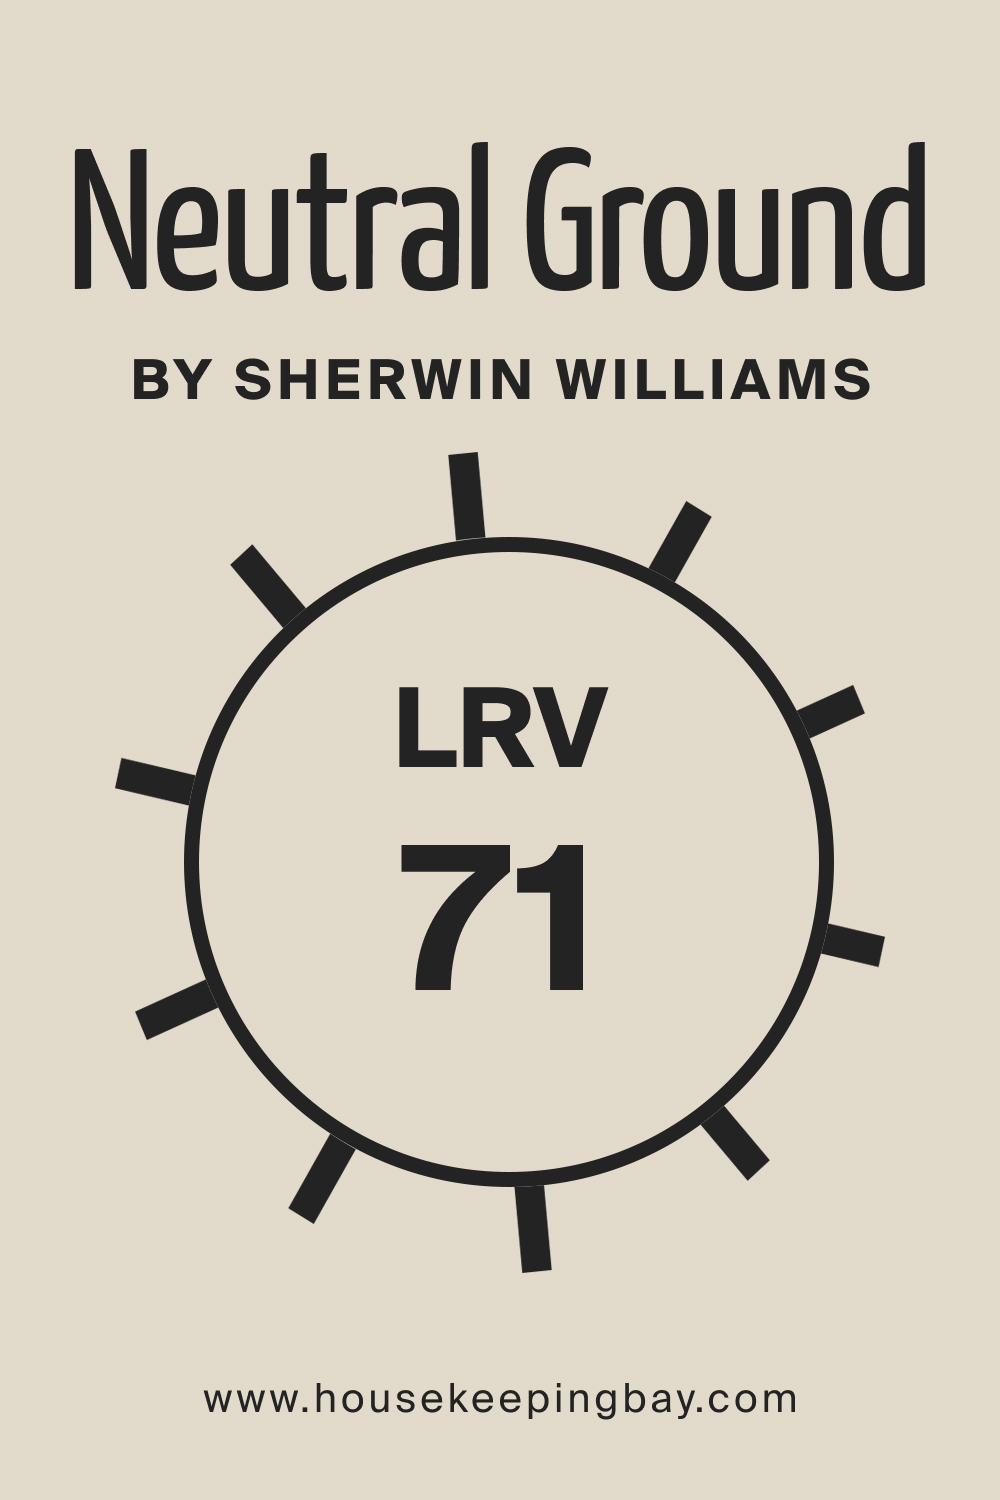 Neutral Ground by Sherwin Williams. LRV – 71